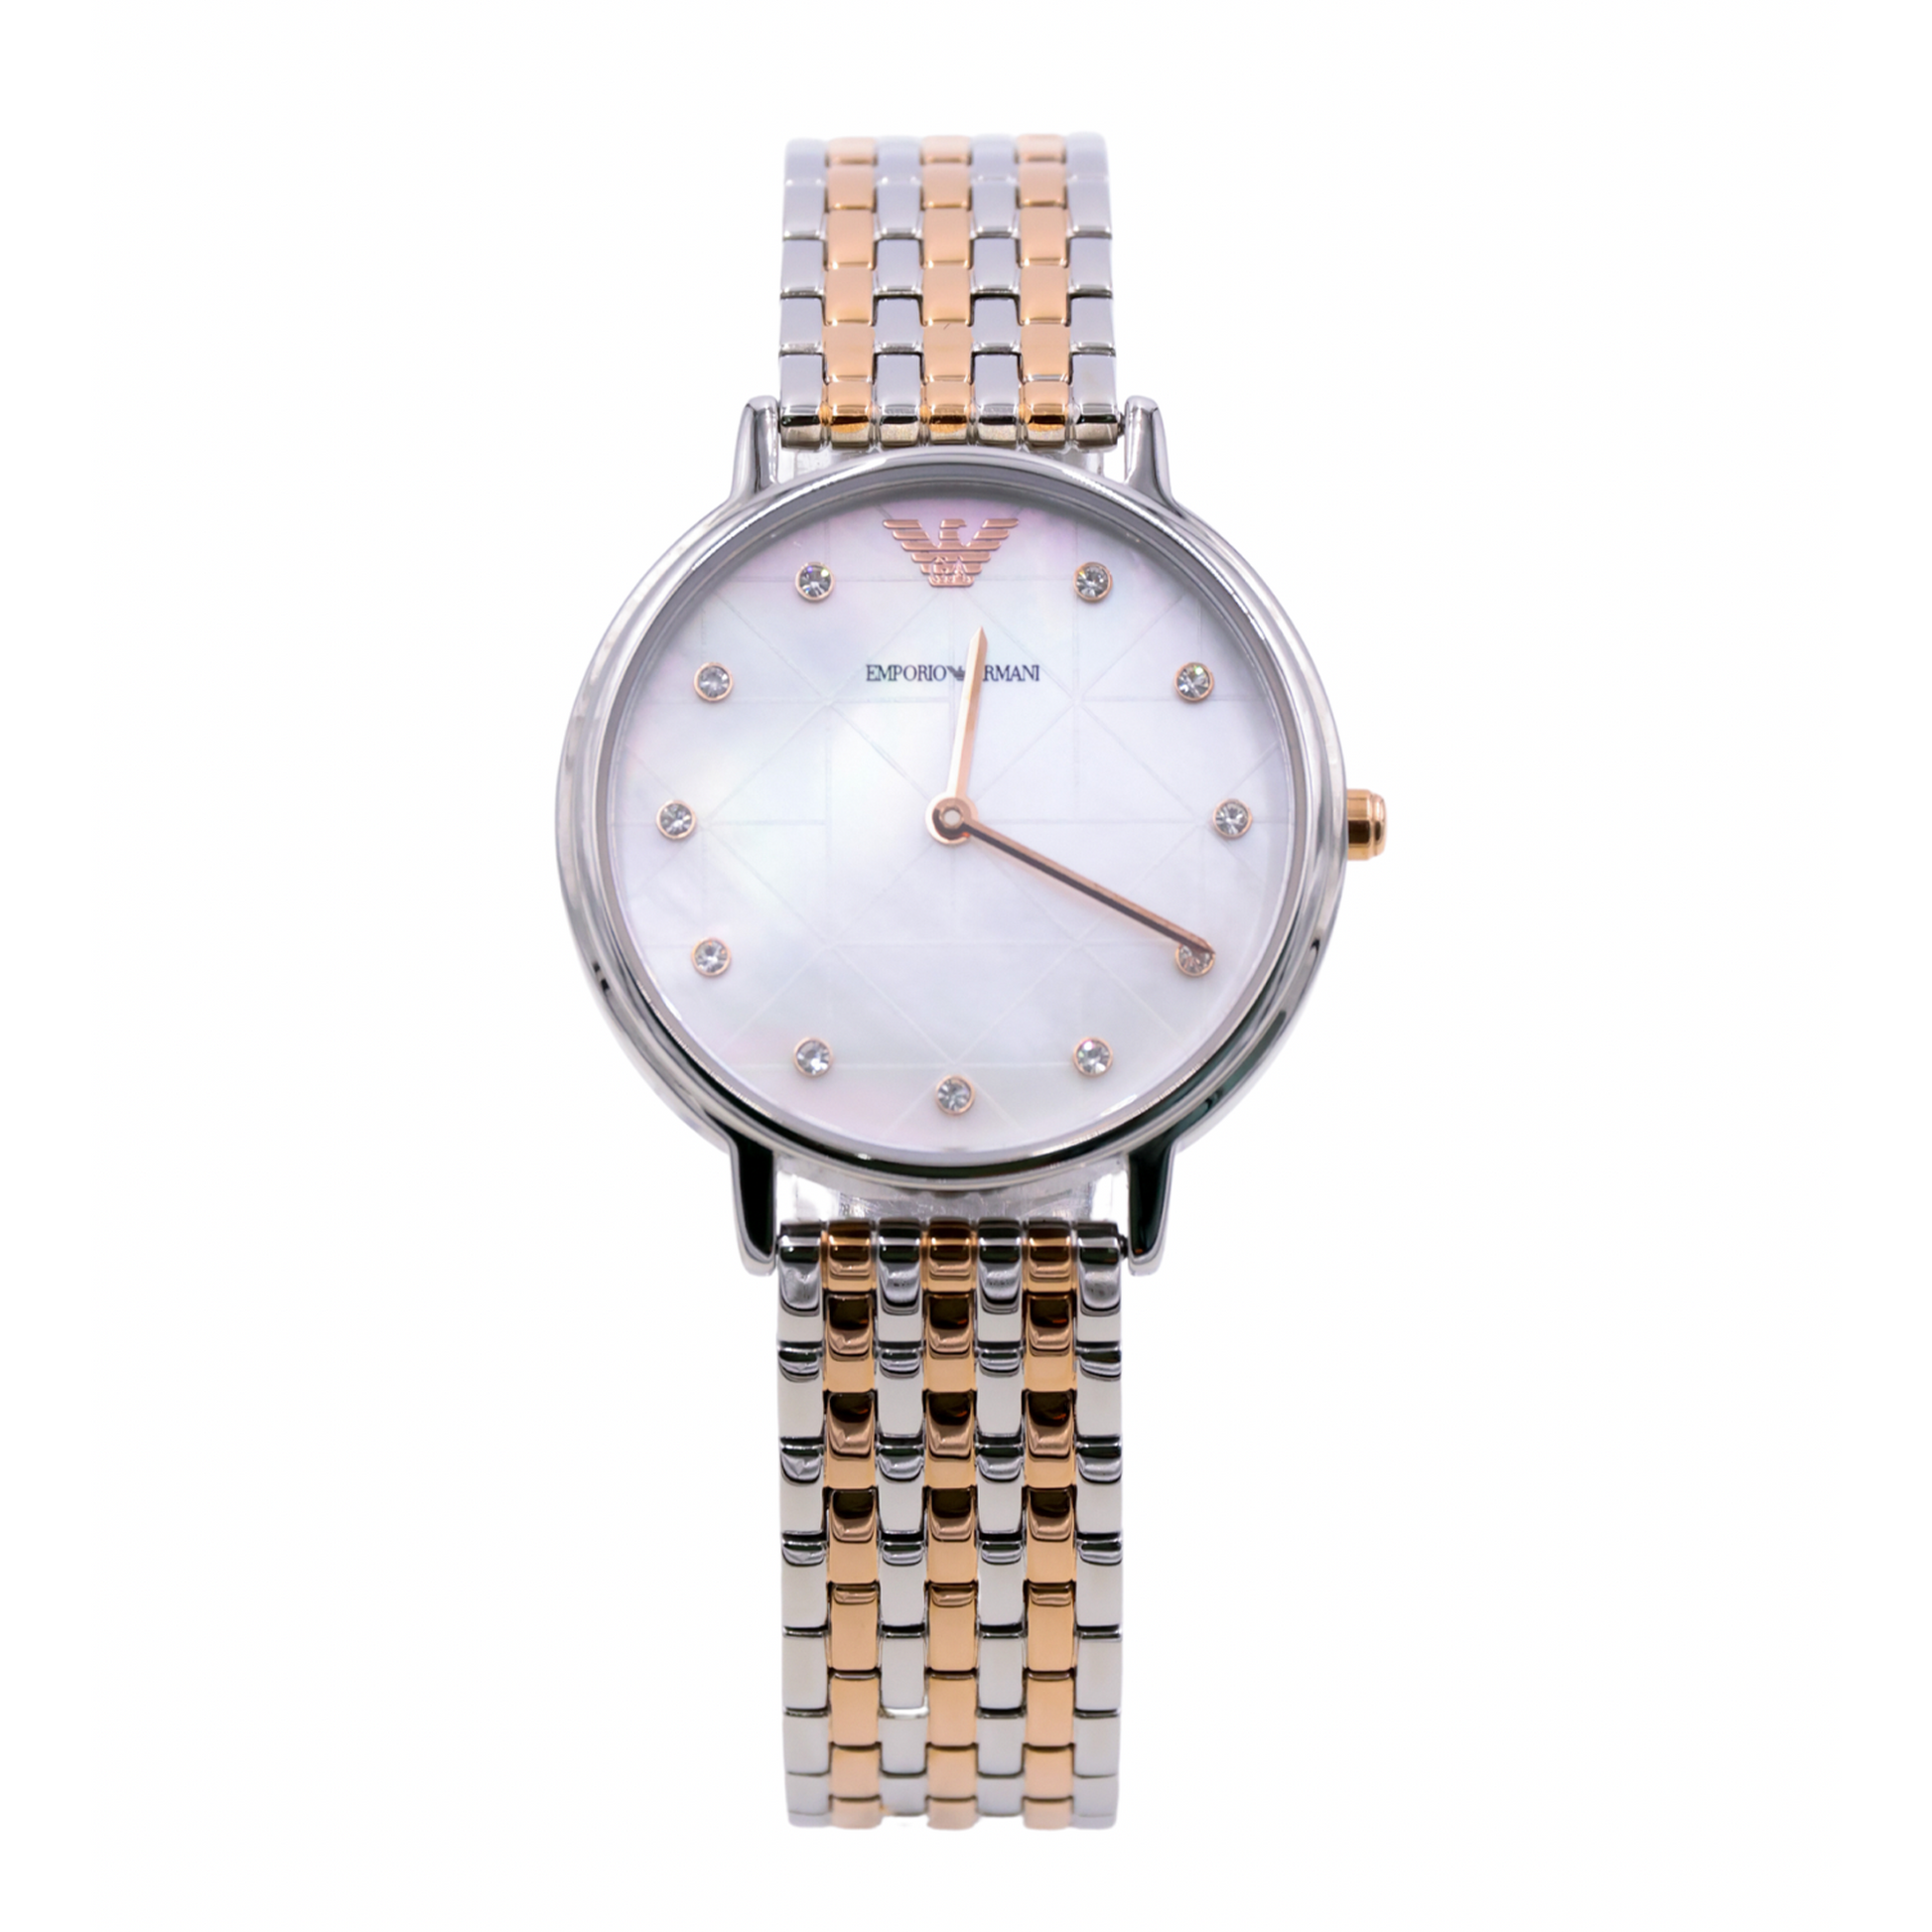 Emporio Armani Crystal White Mother of Pearl Dial Ladies Watch - AR80019 - 723763274029 